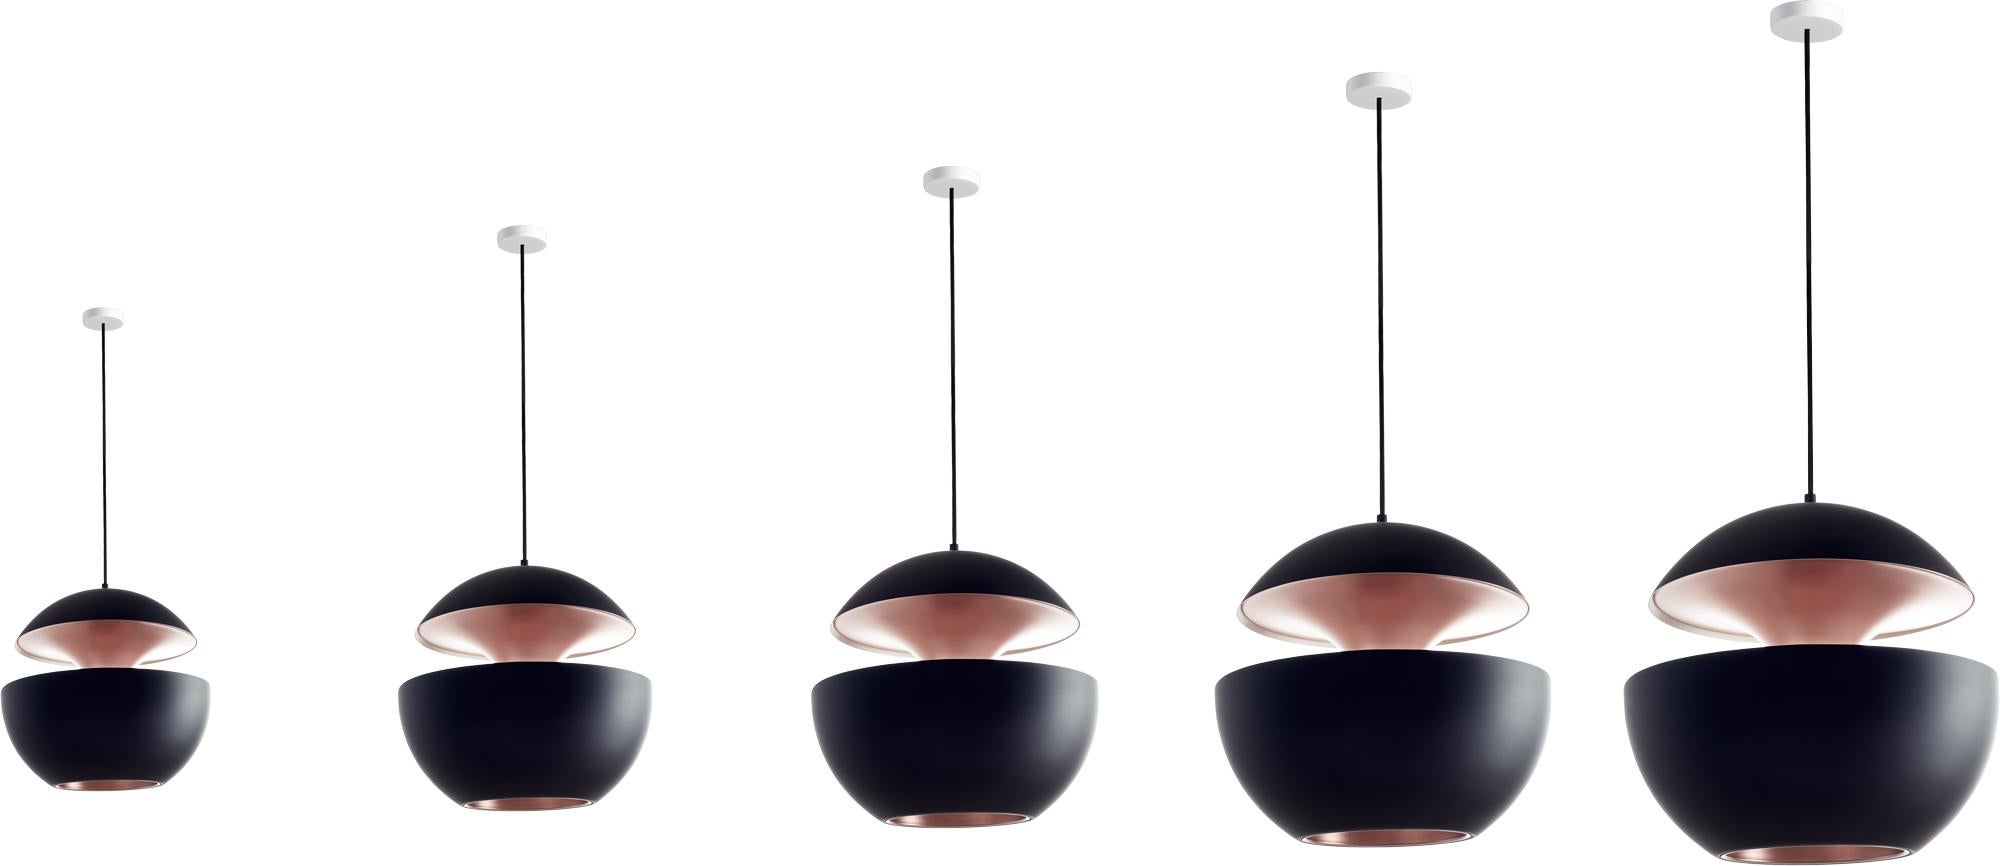 DCW Editions Here Comes the Sun 175 Pendant Lamp in Black Pink Copper Aluminium by Bertrand Balas
 
 Bertrand Balas, architect born in Toulouse in 1935 likes to watch the sun set over the Garonne river. With that musical lilt typical of the south,